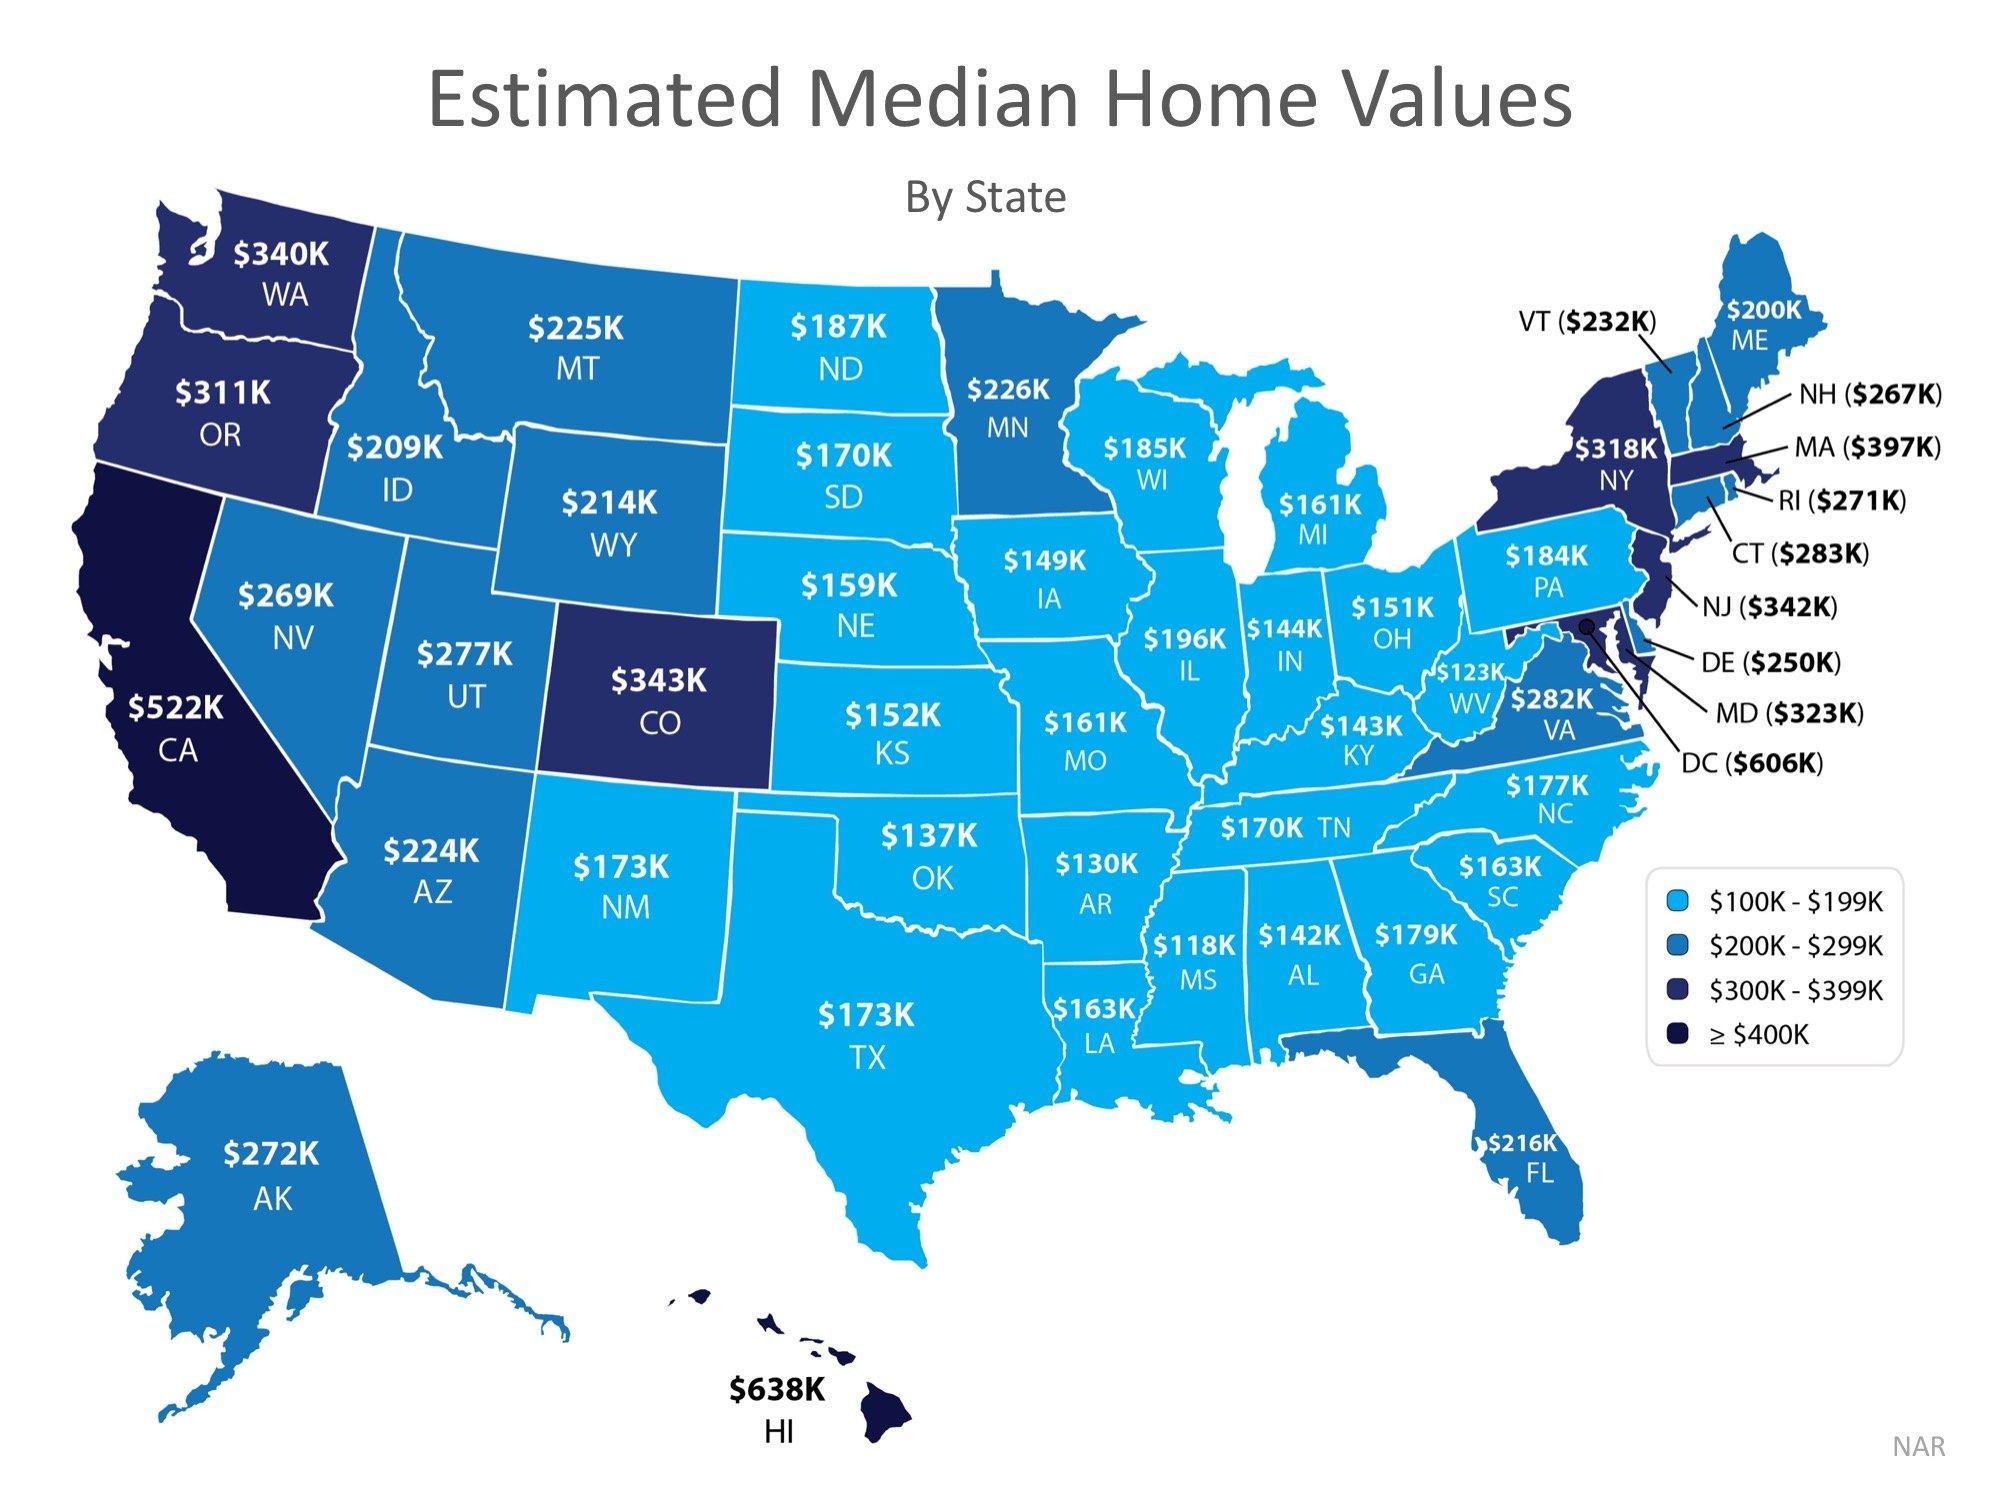 How do you find the average home sale voulme for an area